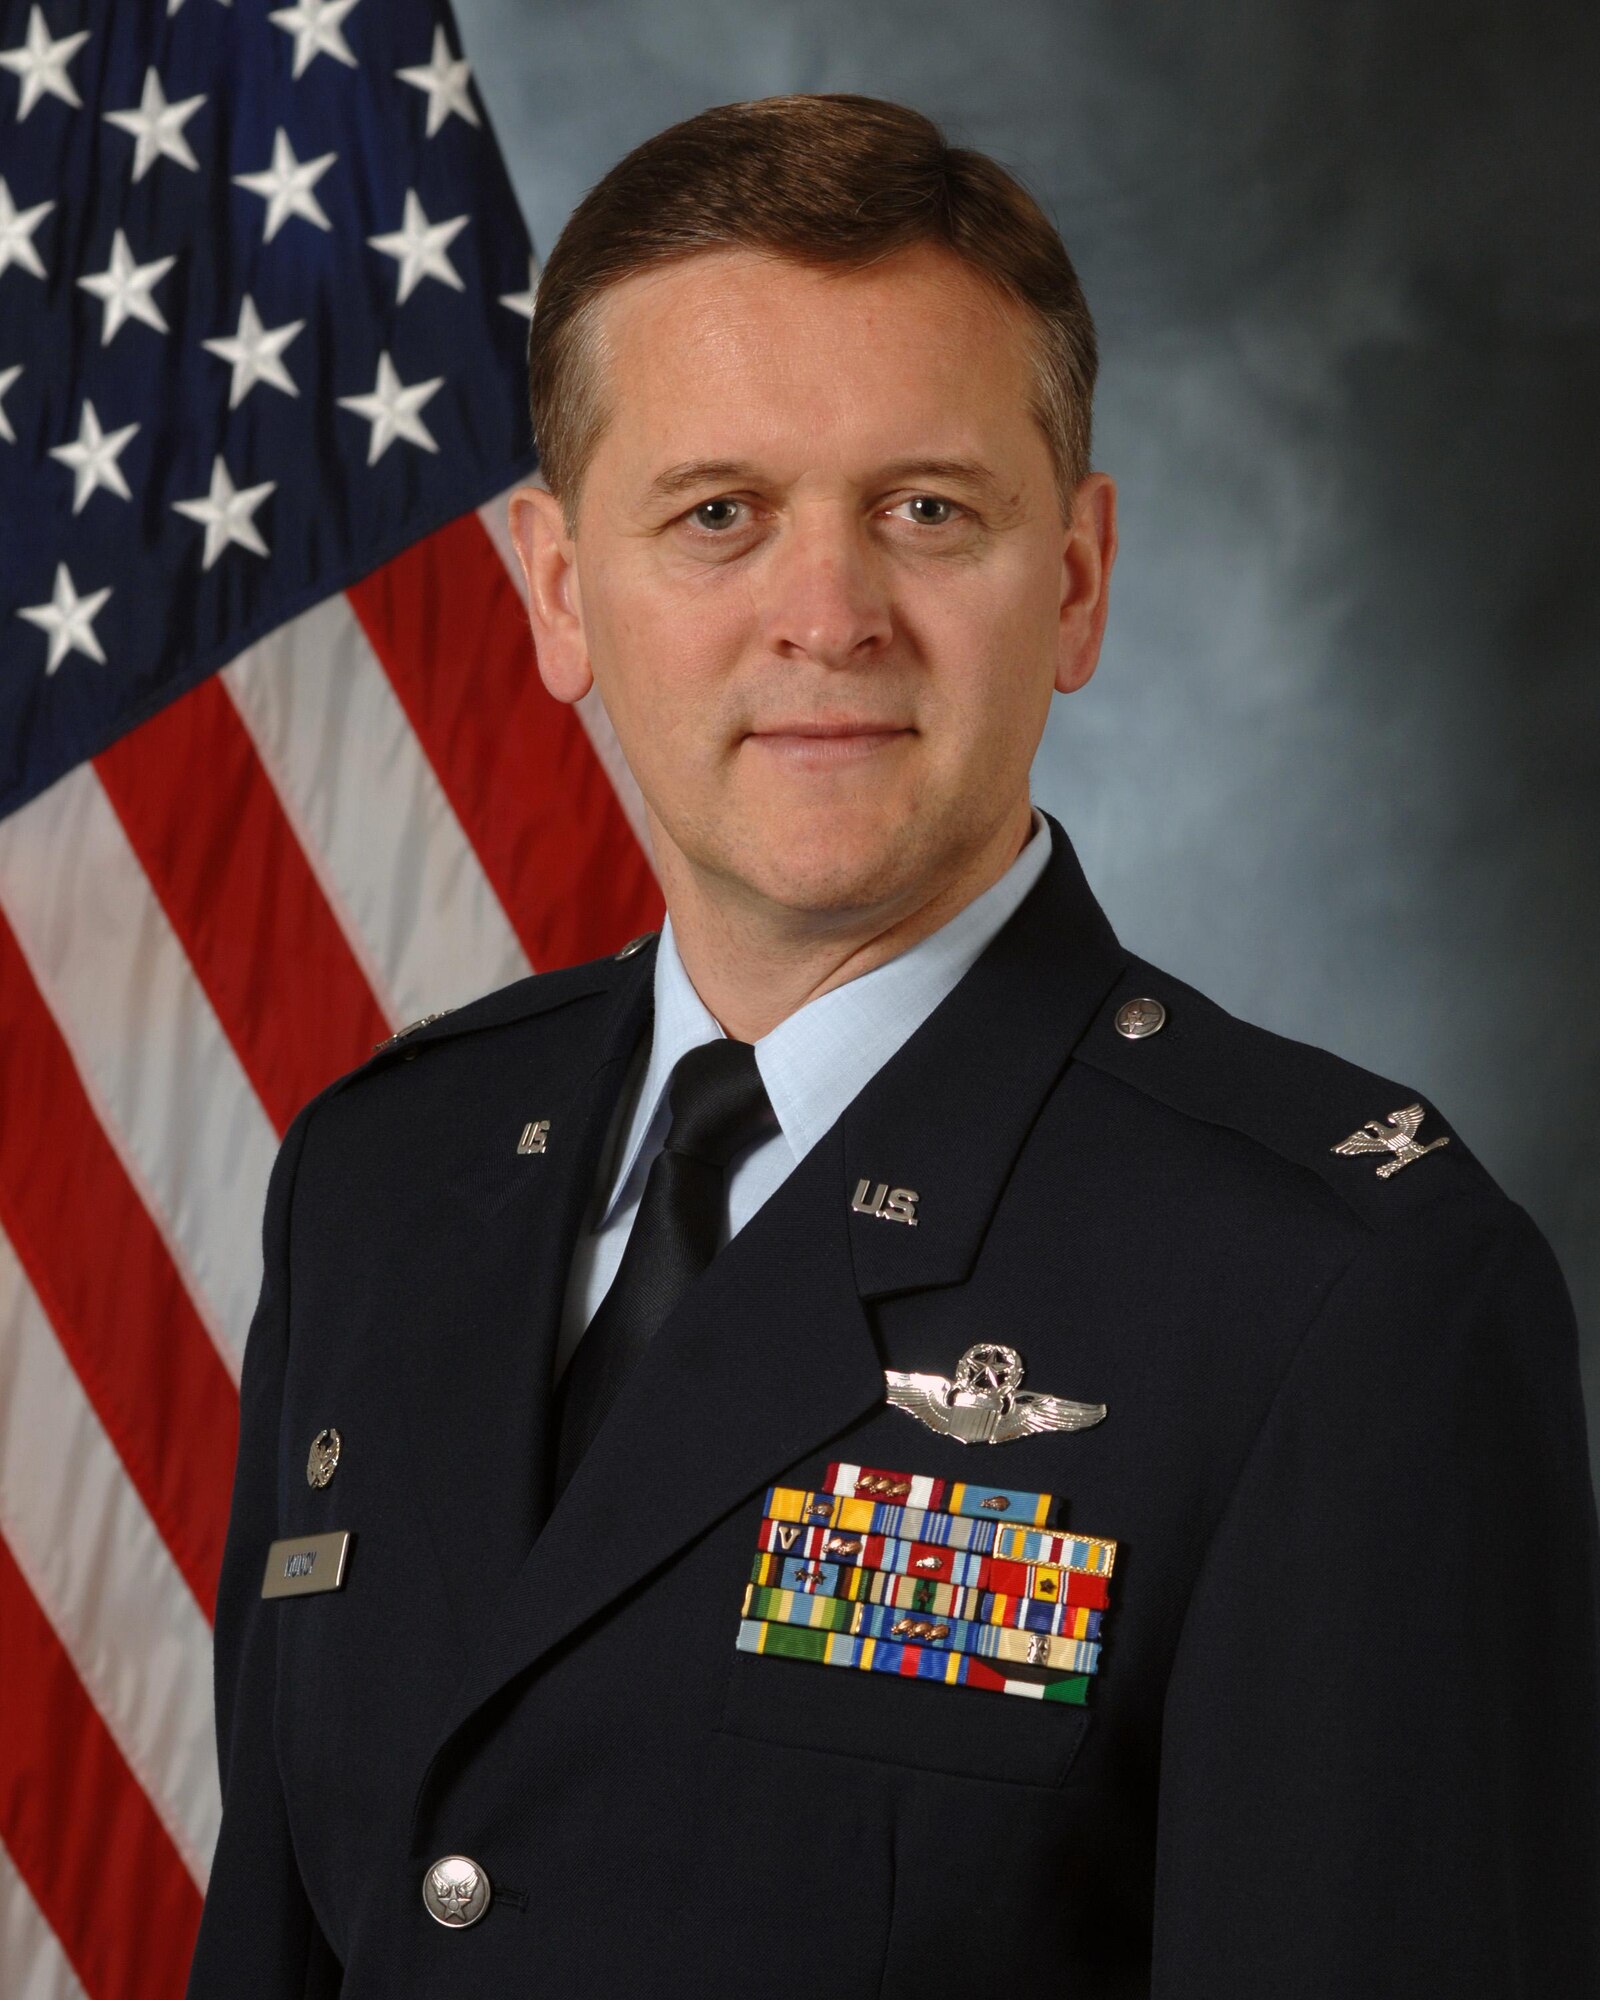 JOINT BASE ANDREWS, Md. -- Col. Russell A. Muncy official photo (U.S. Air Force photo/released)